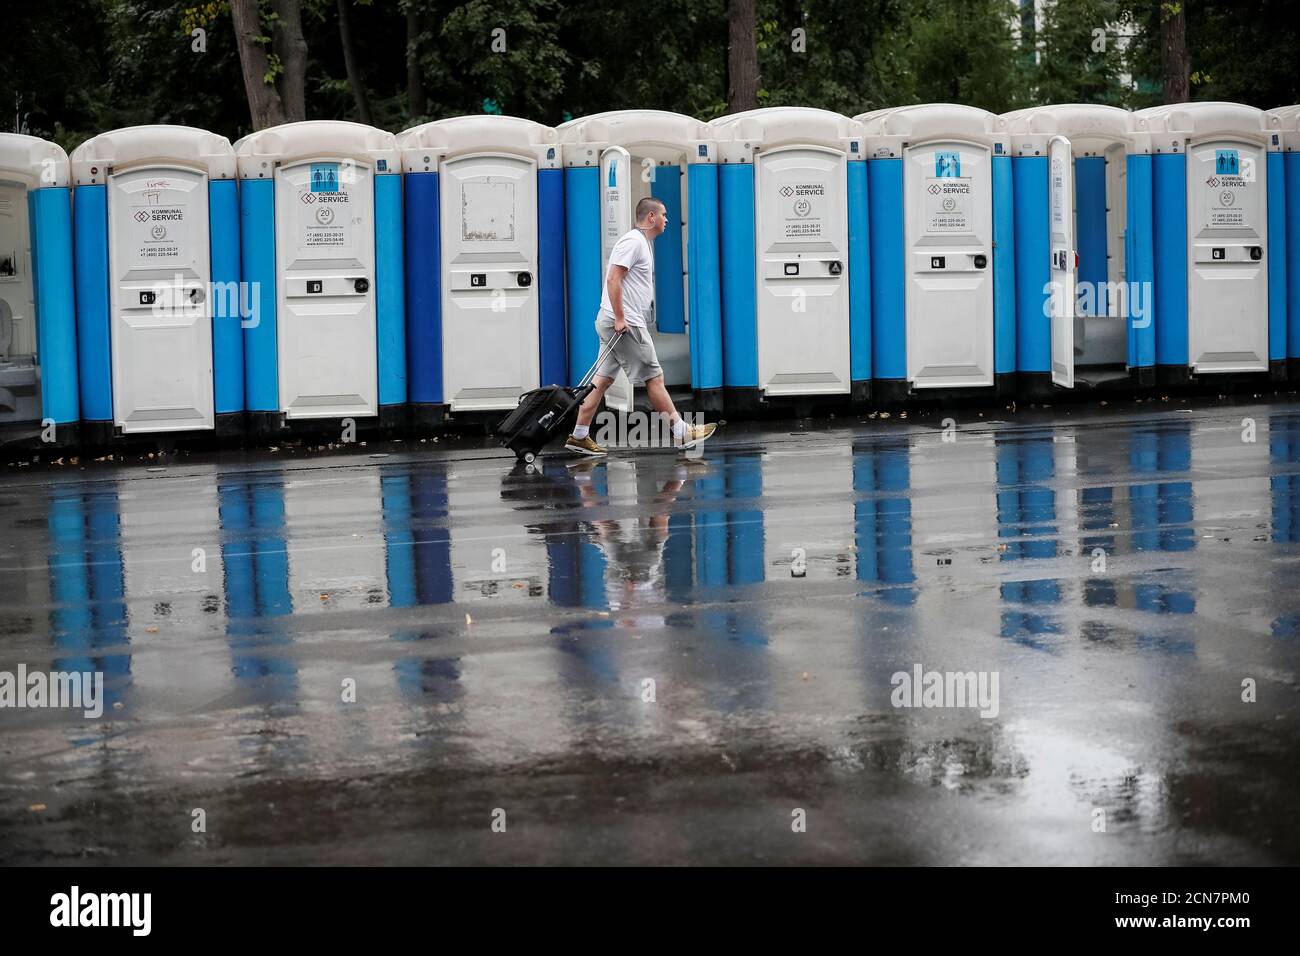 A photographer walks past mobile toilets at Luzhniki stadium in Moscow, Russia July 14, 2018. As well as shooting all the matches, Reuters photographers are producing pictures showing their own quirky view from the sidelines of the World Cup. REUTERS/Gleb Garanich Stock Photo